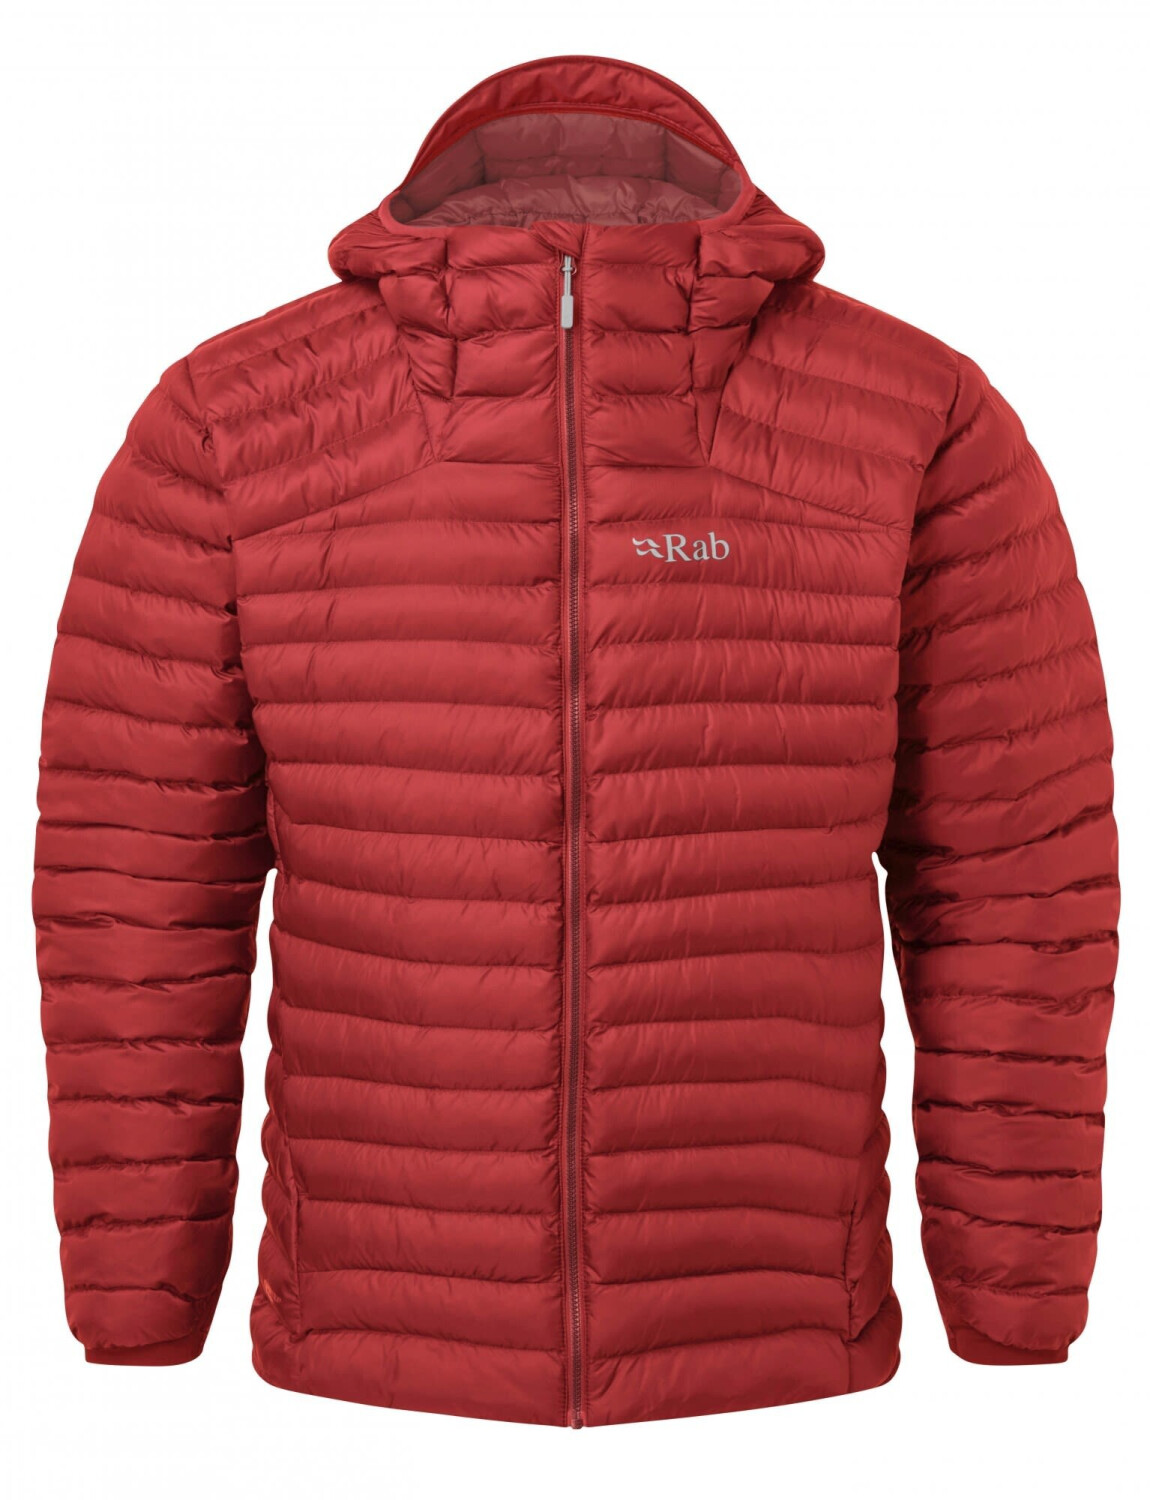 Buy Rab Cirrus Alpine Jacket ascent red from £130.00 (Today) – Best ...